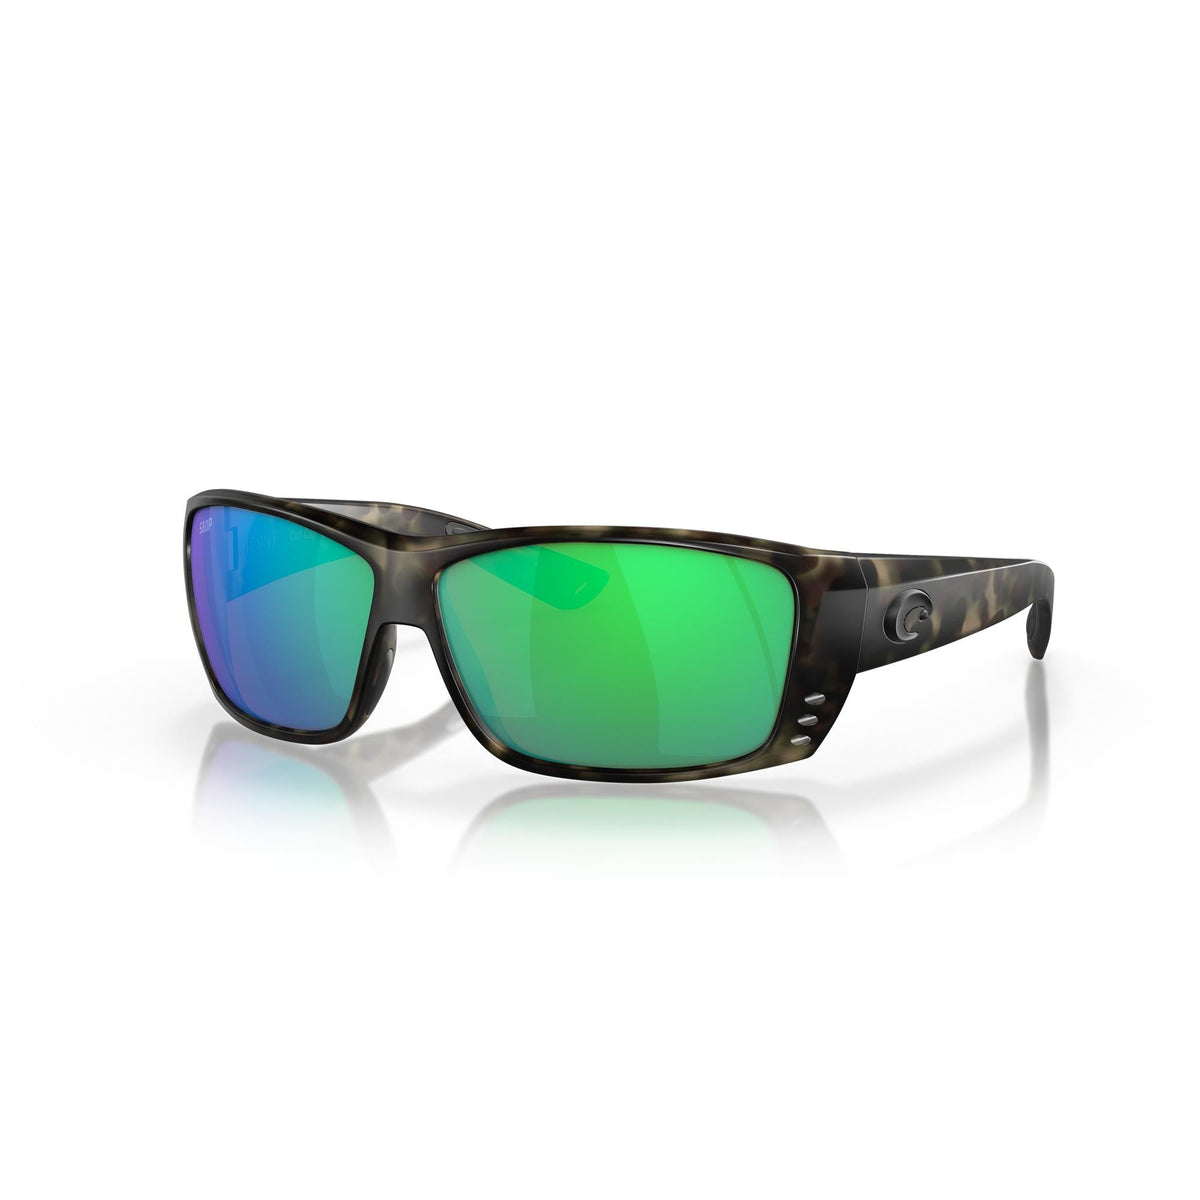 View of Sunglasses Costa Cat Cay Wetlands Green Mirror 580G available at EZOKO Pike and Musky Shop